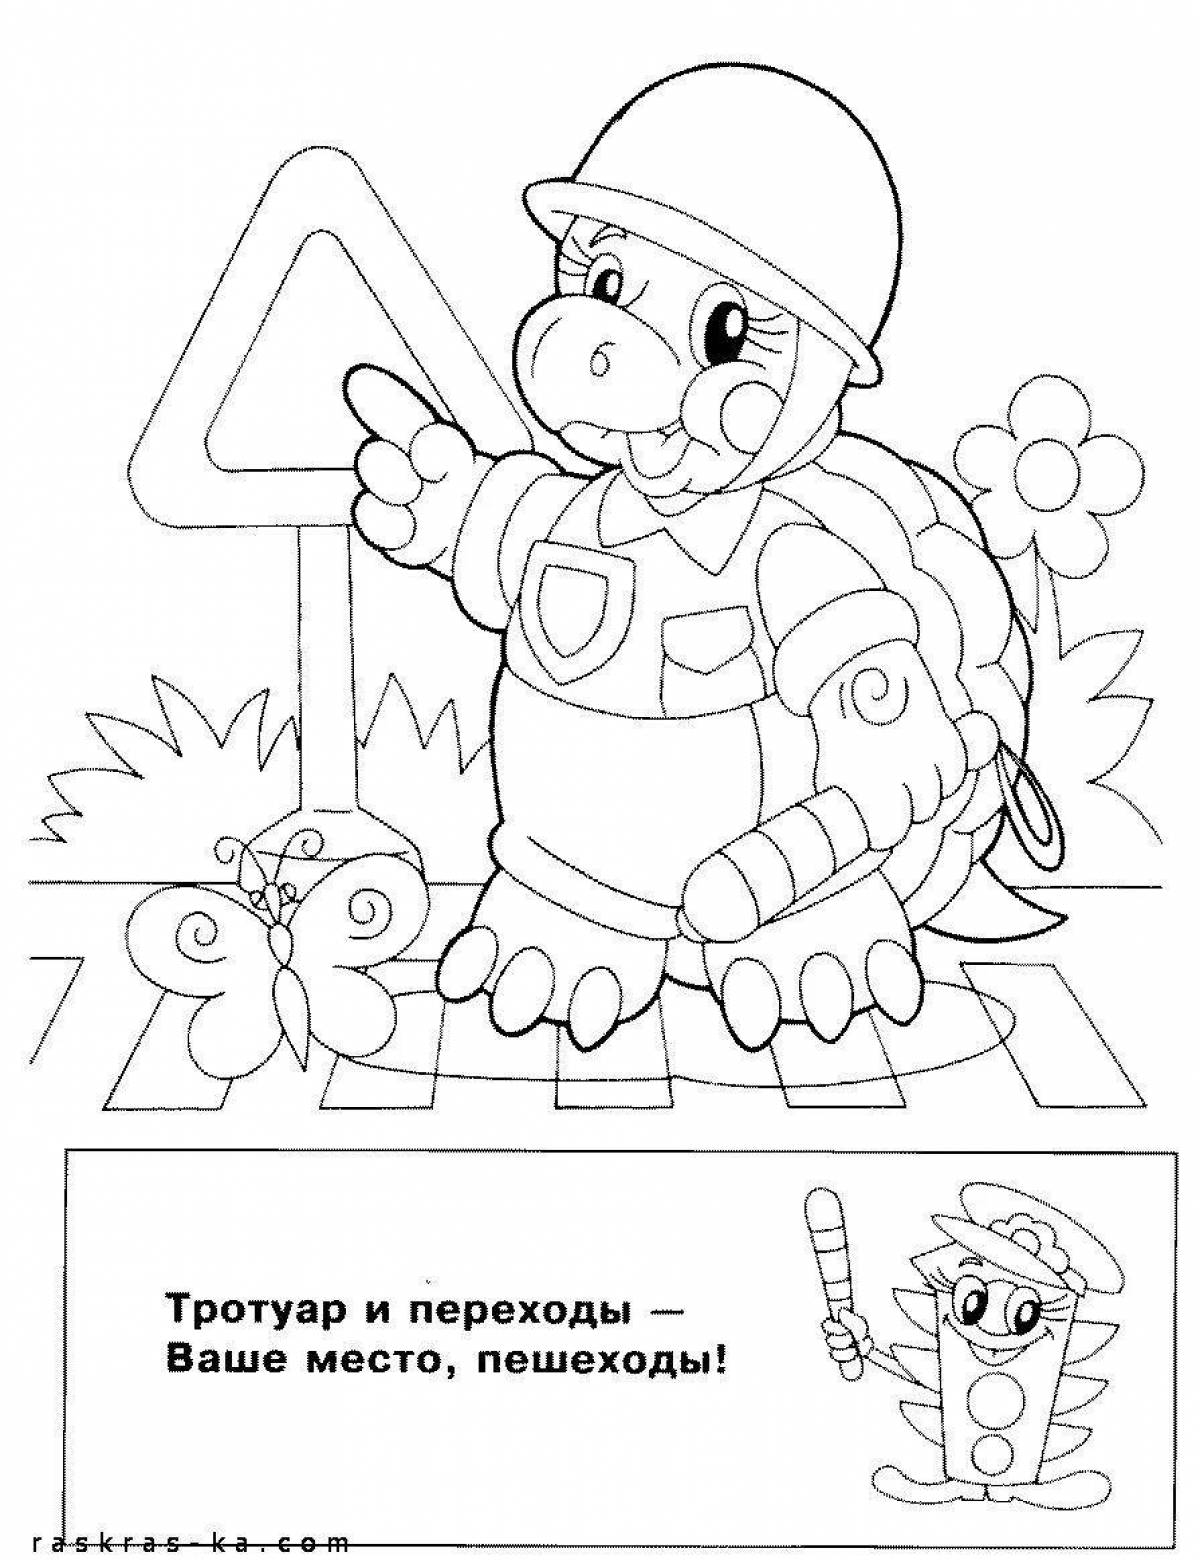 Exciting traffic rules coloring page